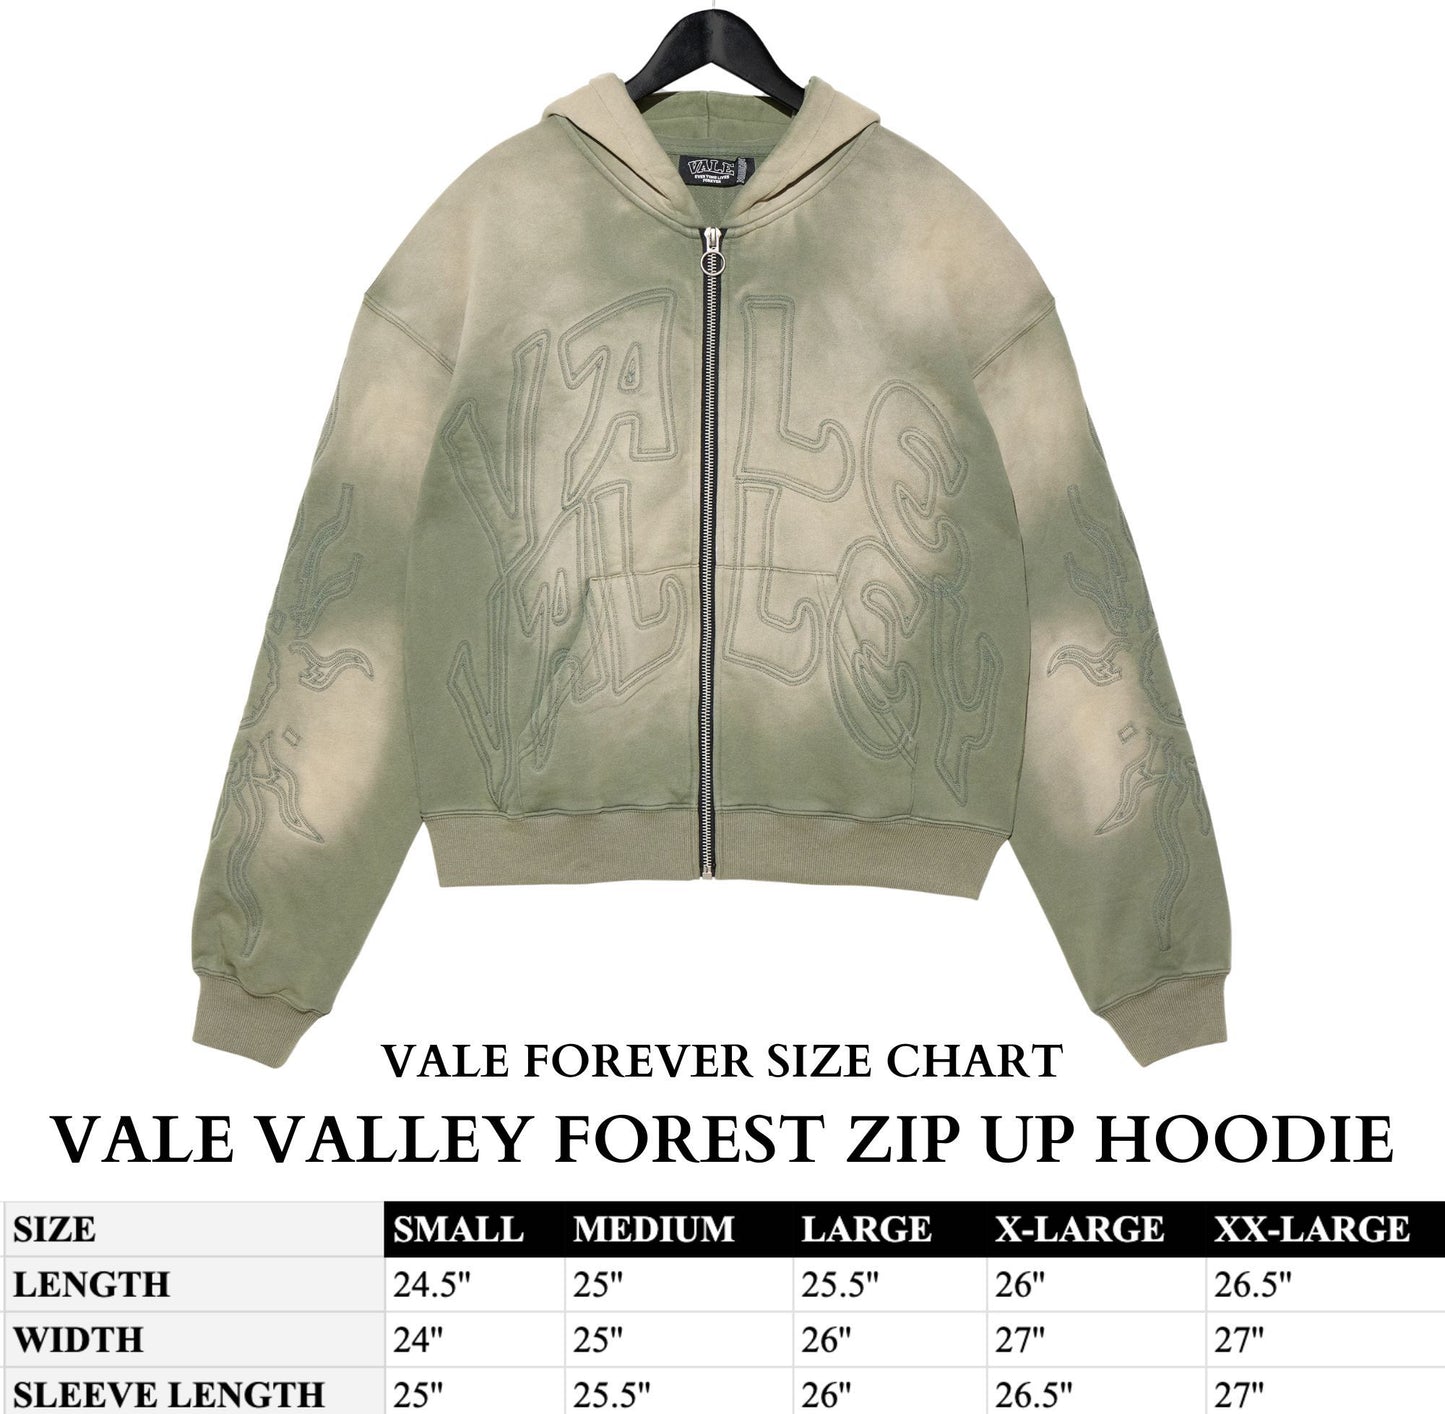 VALE VALLEY FOREST ZIP UP HOODIE